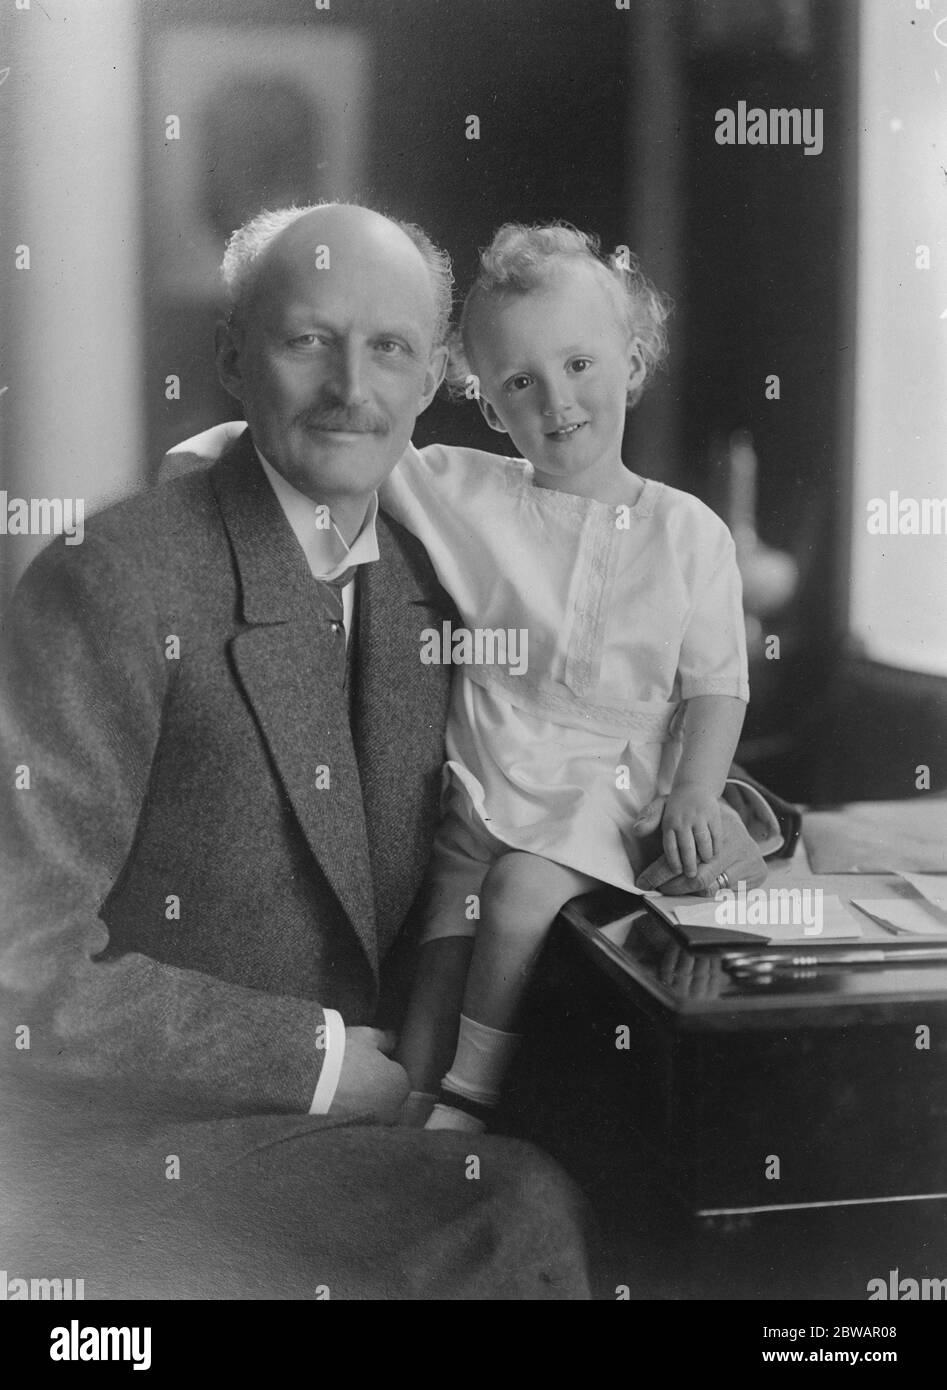 Prince Carl . Sweden 's most popular royalty with his little grandson . Prince Carl , President of the Swedish Red Cross , with his two year old little grandson , who first photograph this is , is the elder son of Prince and Princess Axel of Denmark . 13 May 1922 Stock Photo